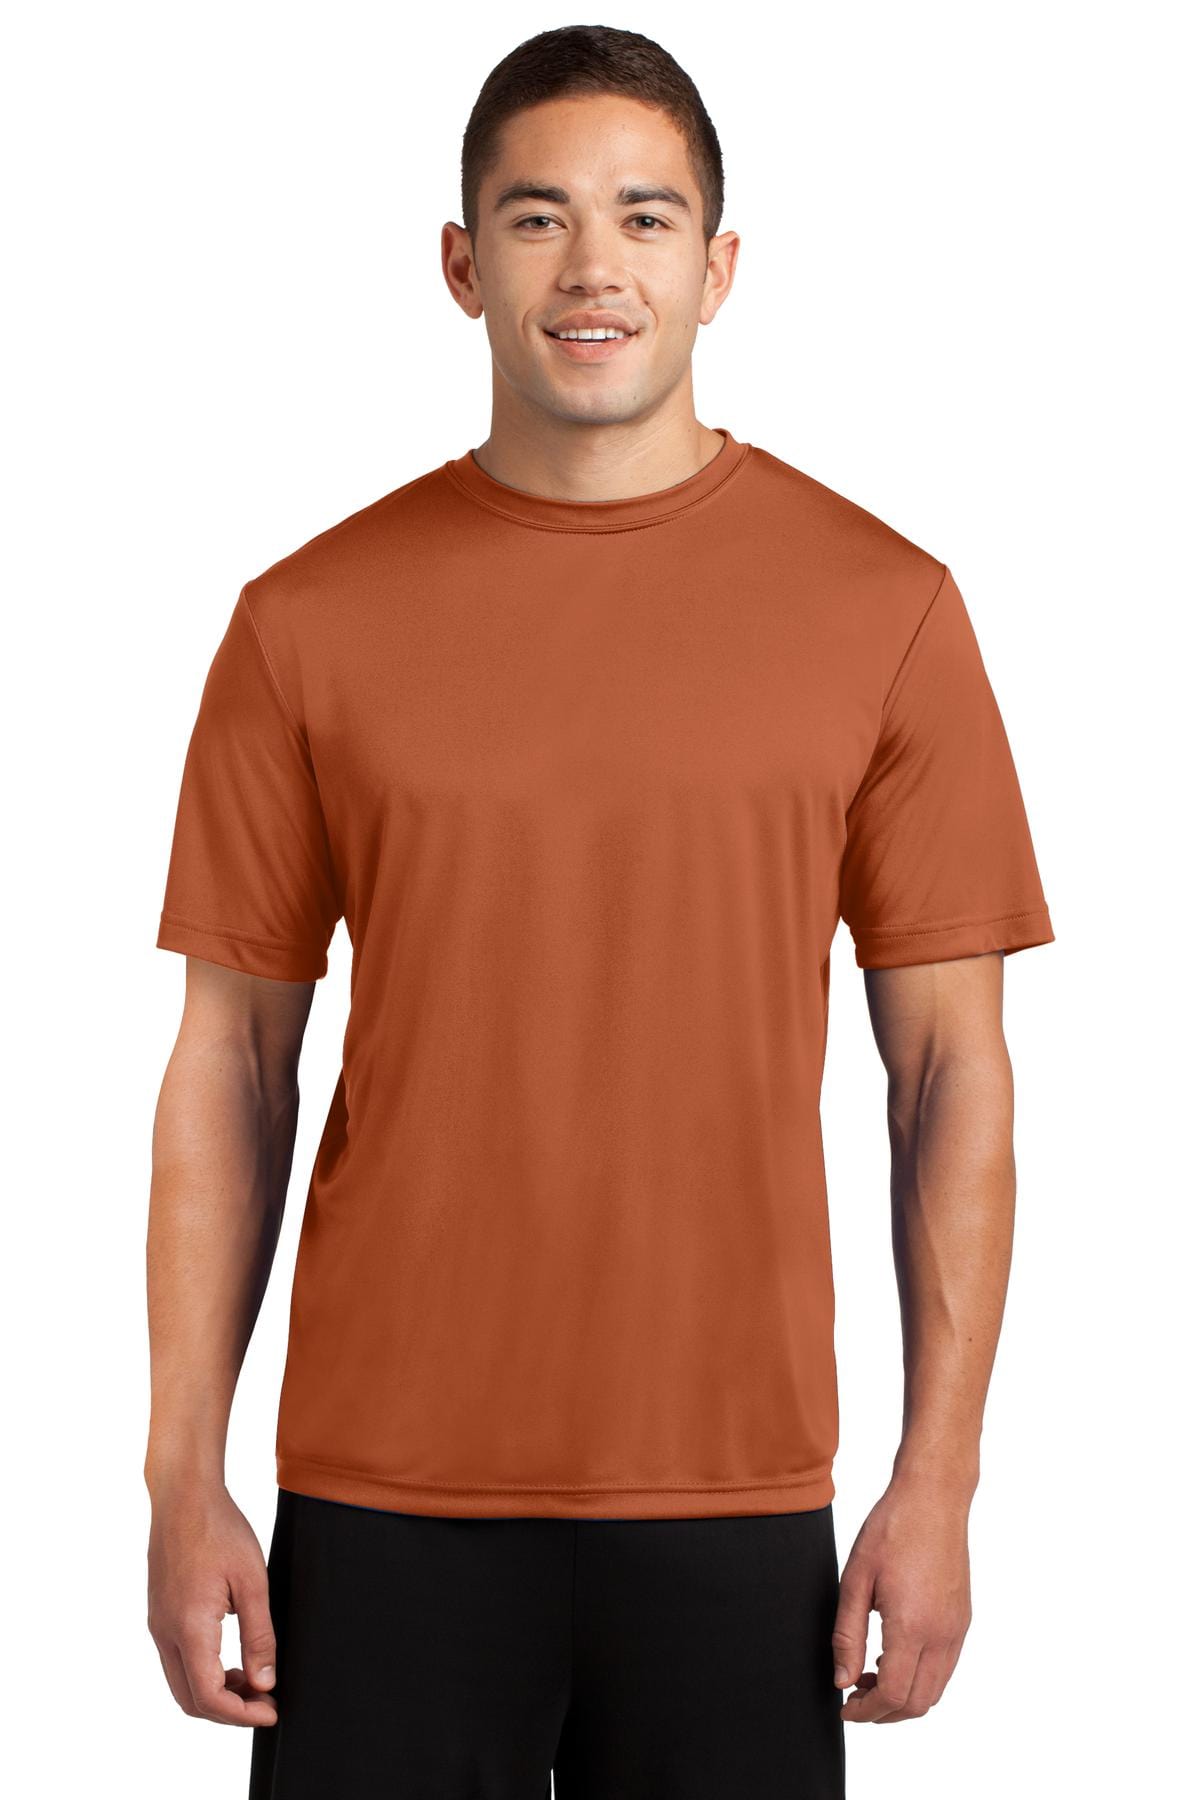 Sport-Tek ® Tall PosiCharge ® Competitor™ Tee. TST350, Basic Colors